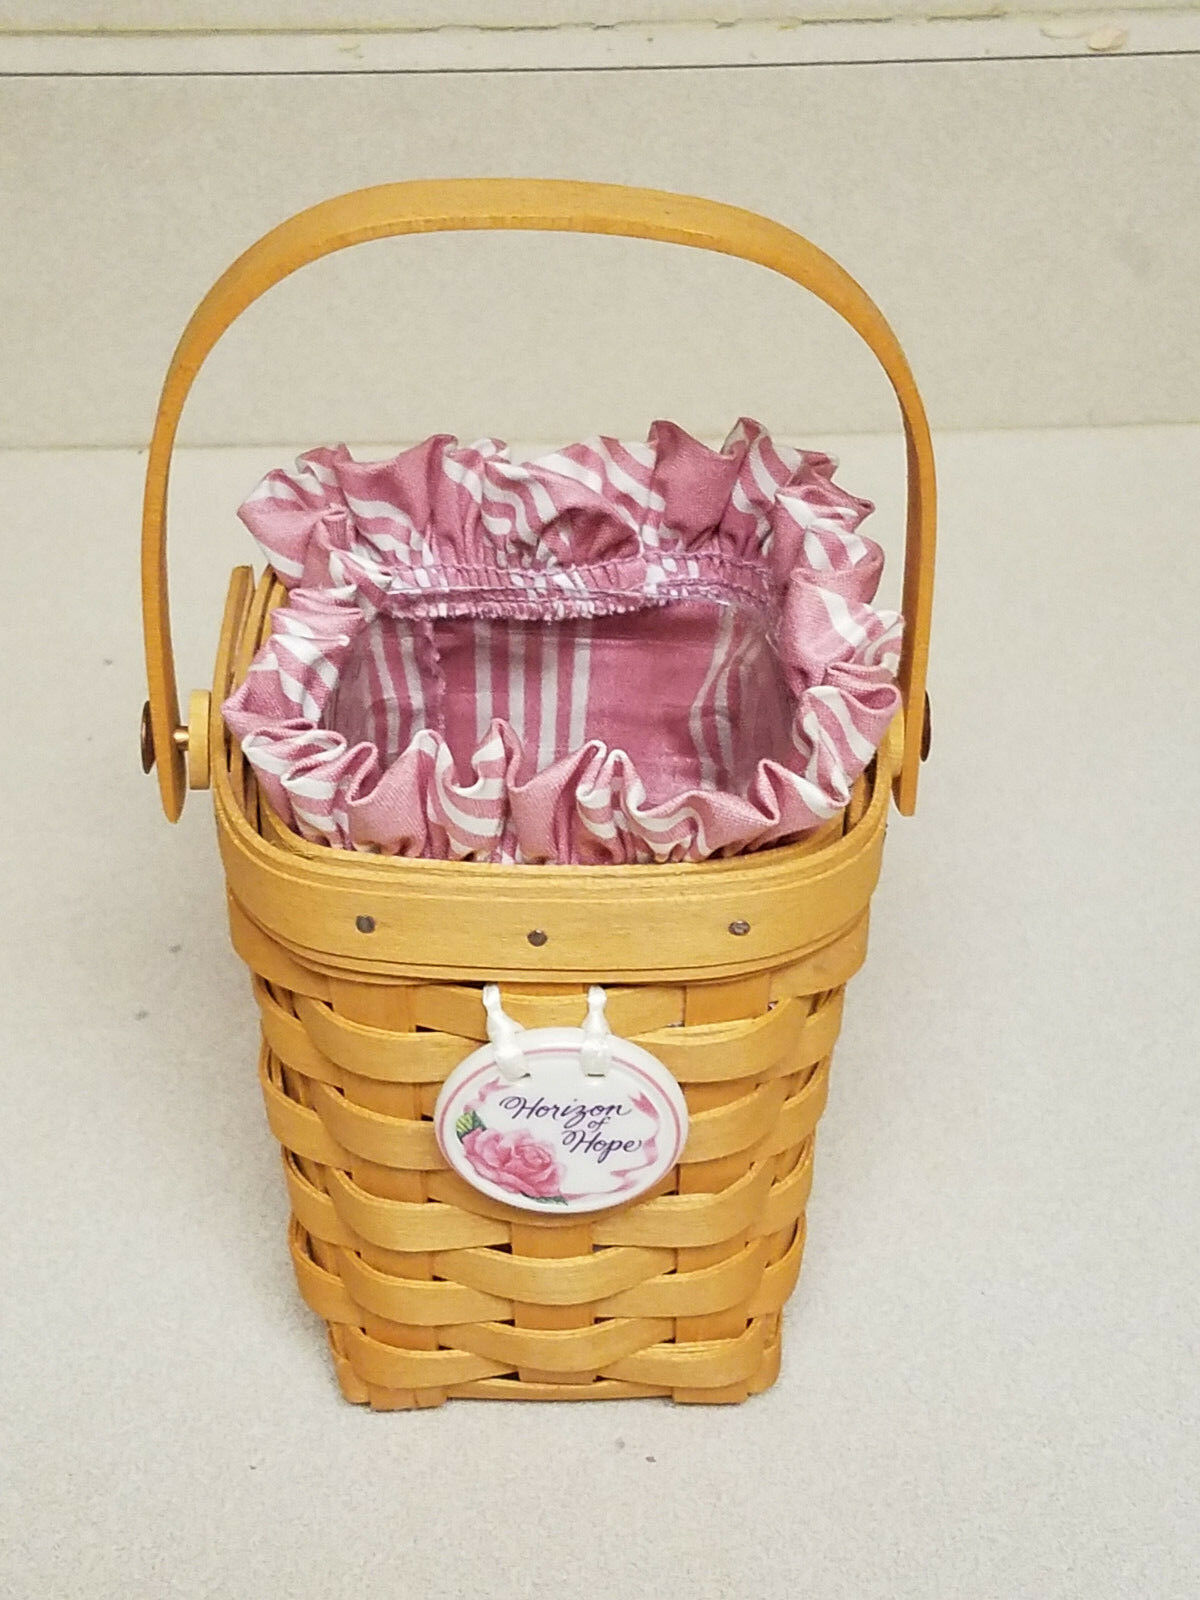 Primary image for Longaberger Handwoven 1998 American Cancer Society Basket w/ Liner